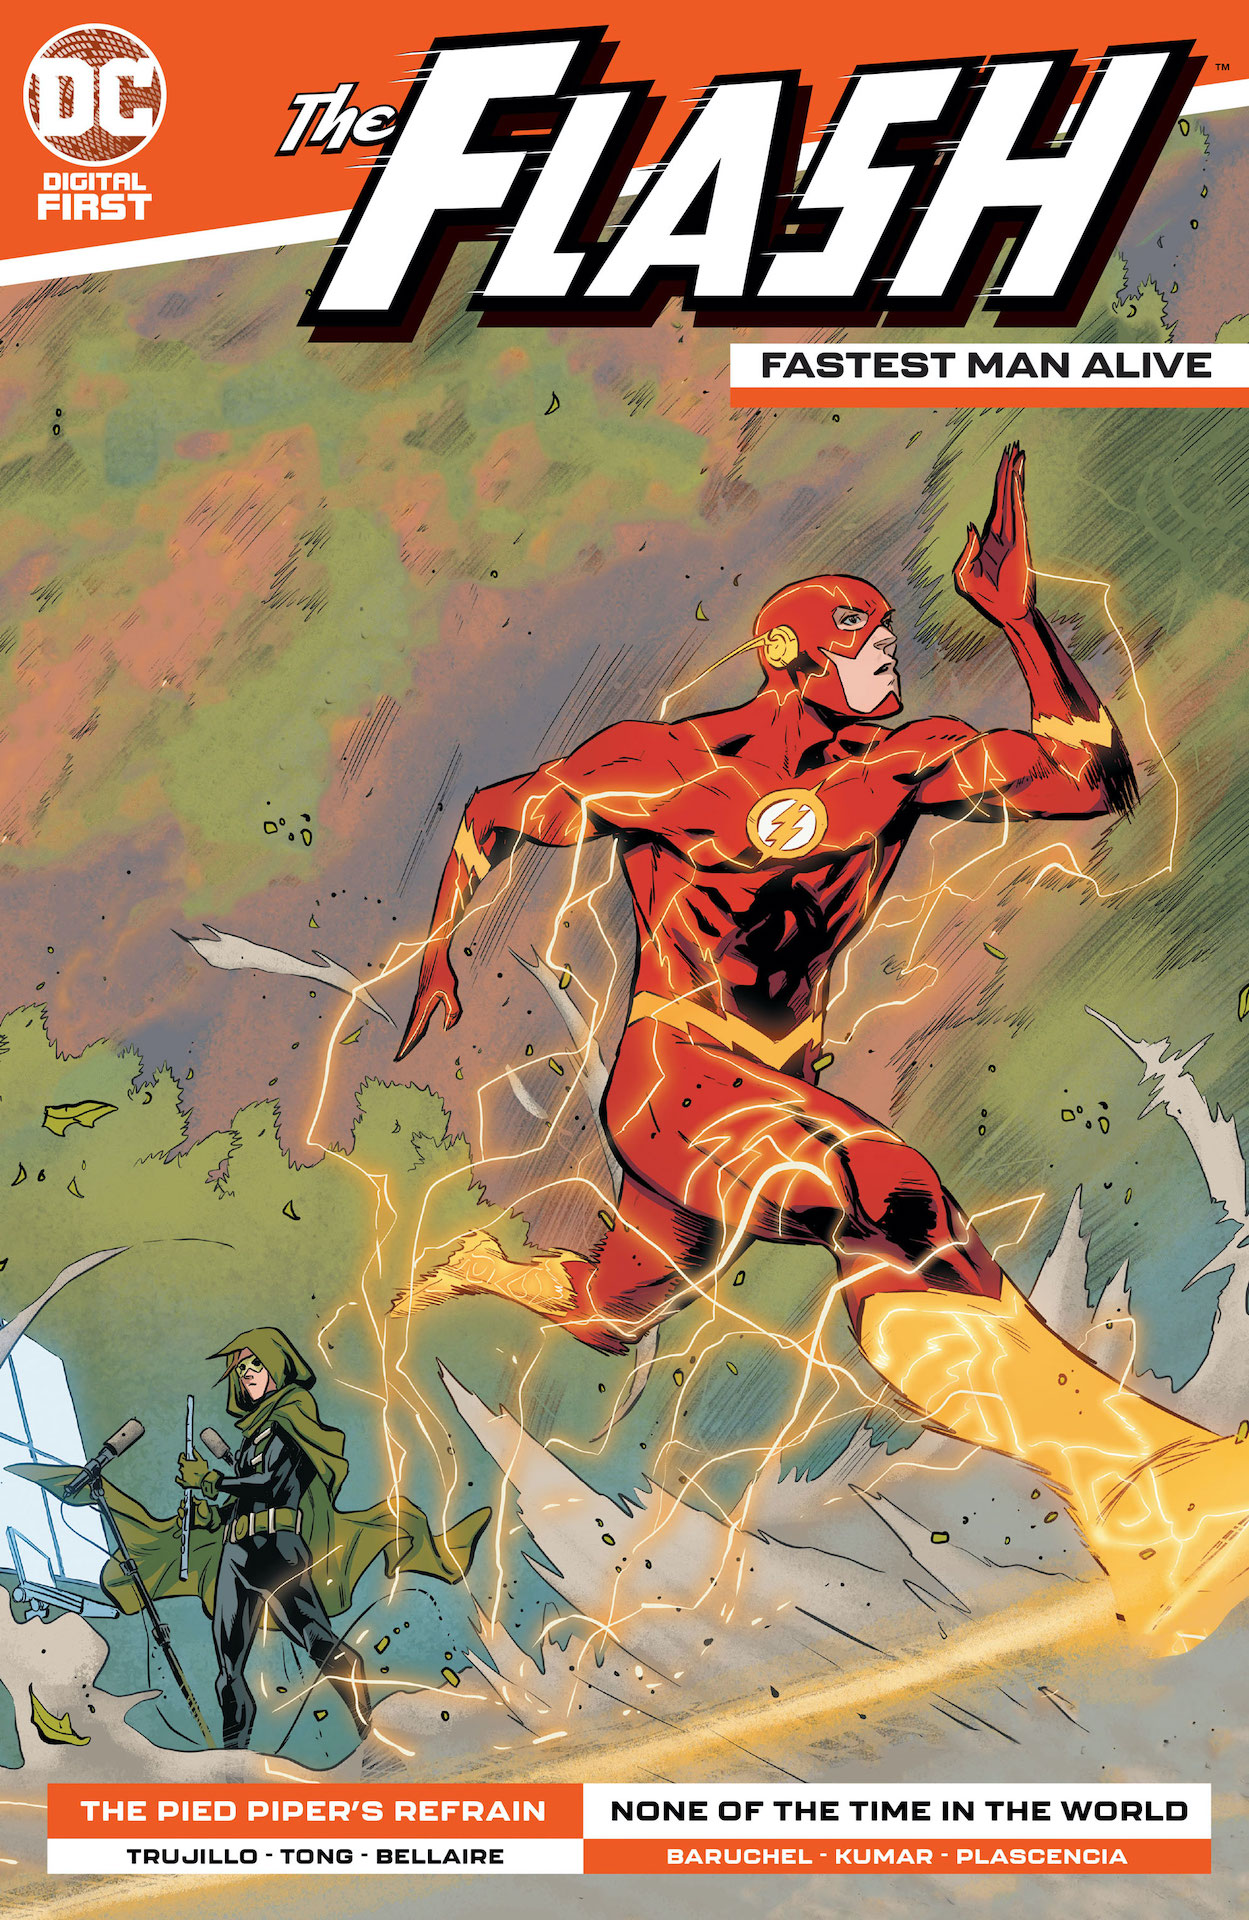 DC Preview: The Flash: Fastest Man Alive #7